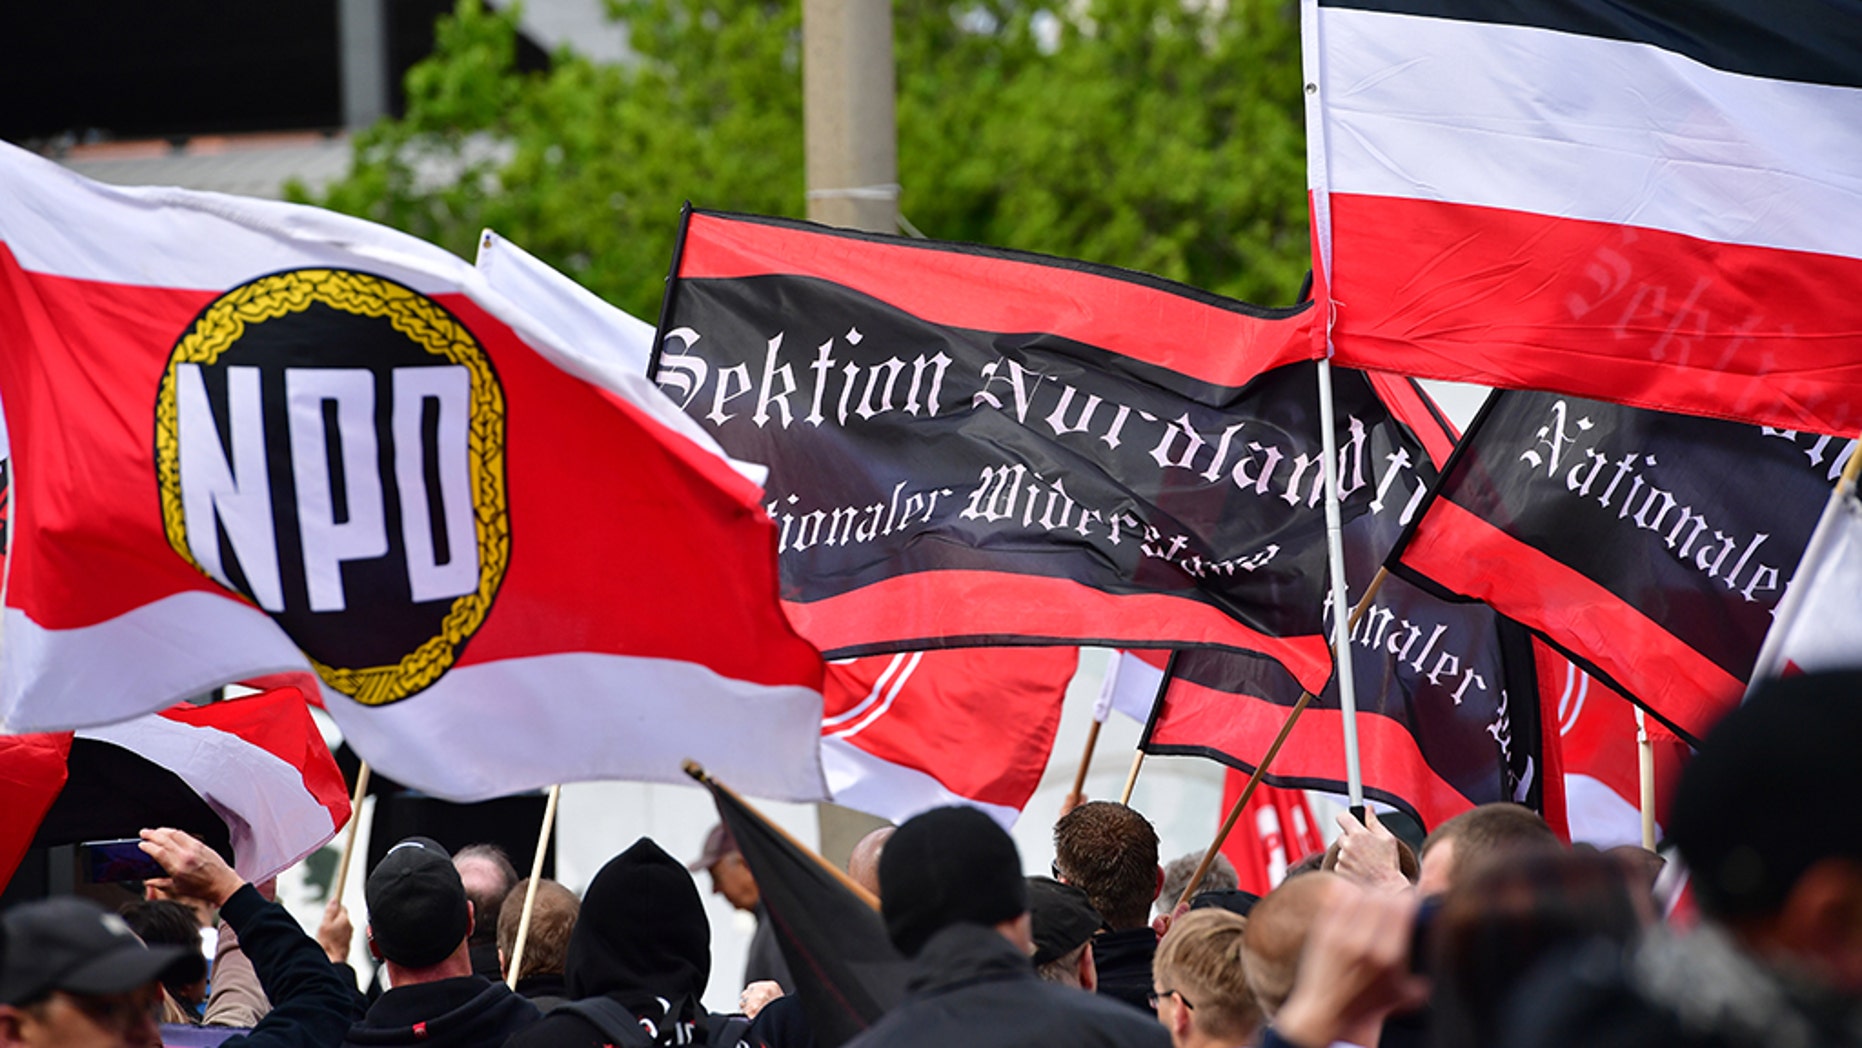 German far-right party threatens to start street patrols after ethnic violence